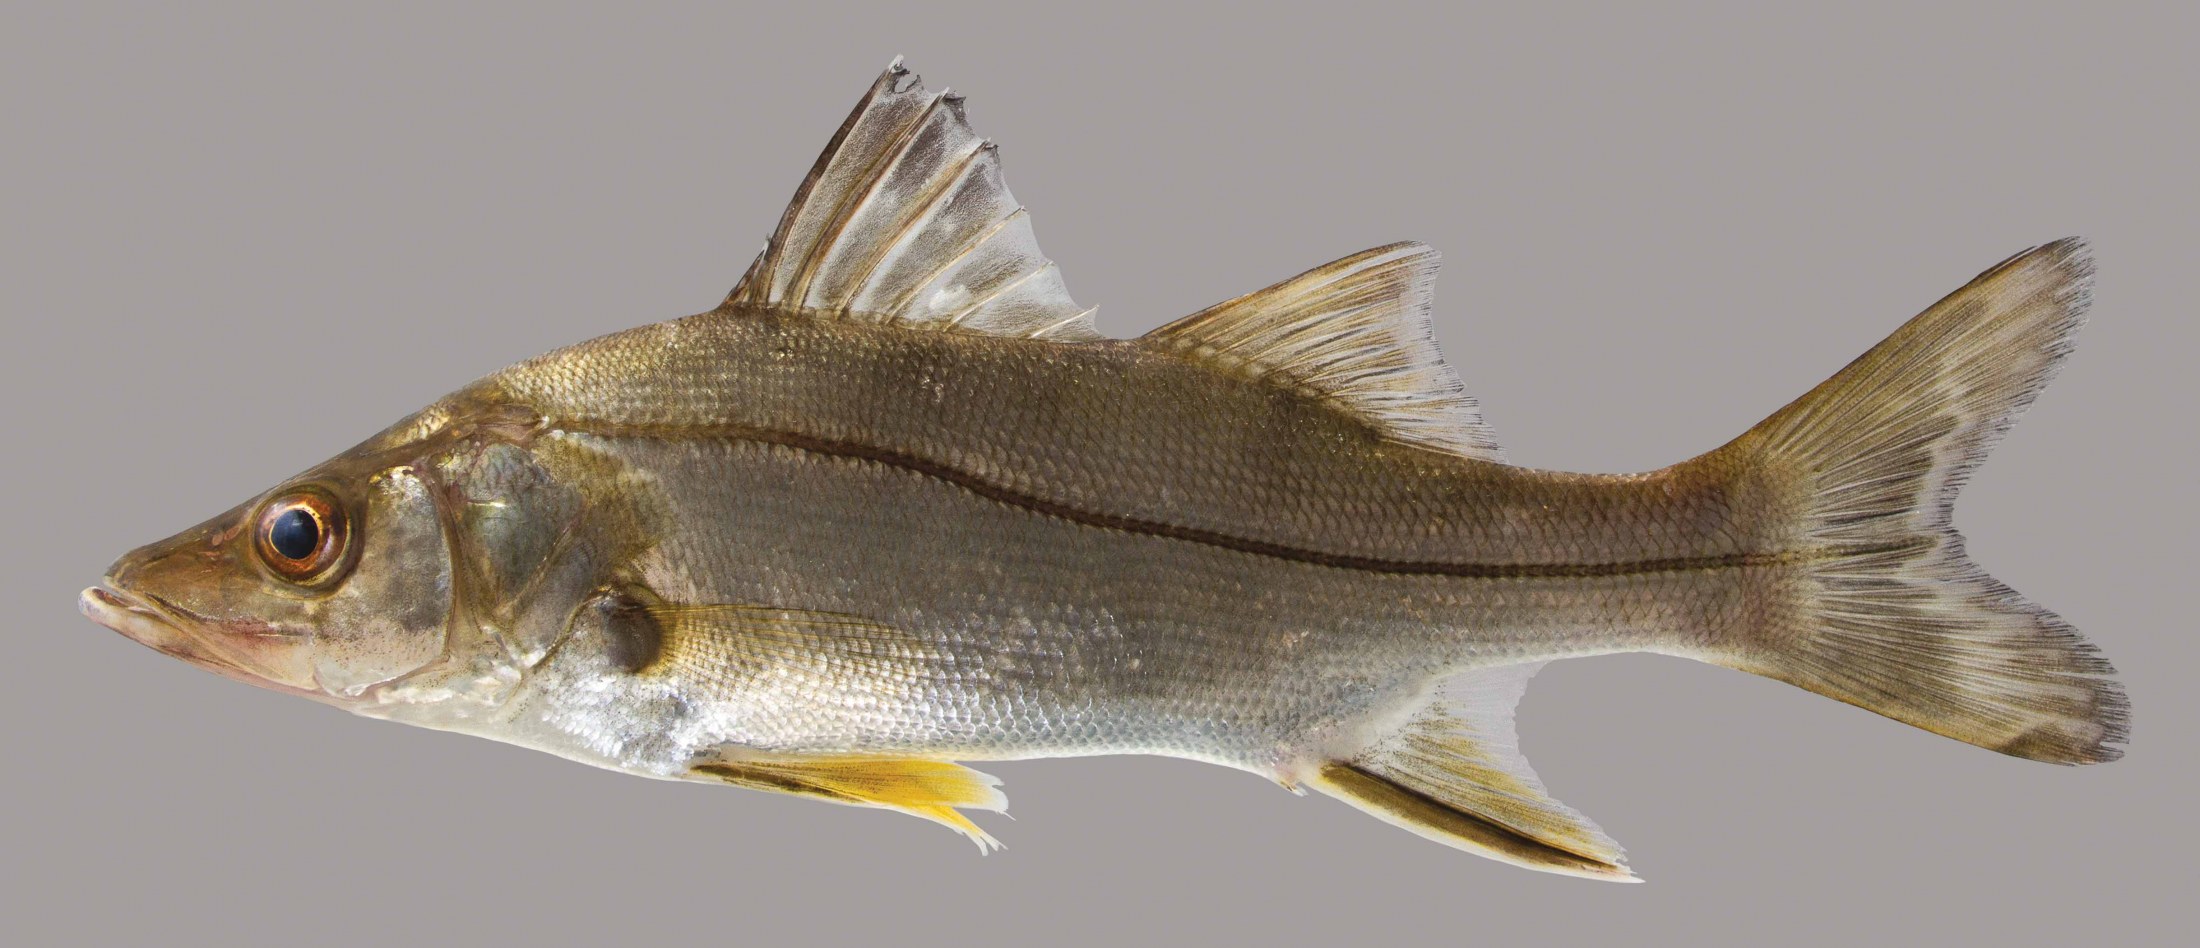 Lateral view of a fat snook